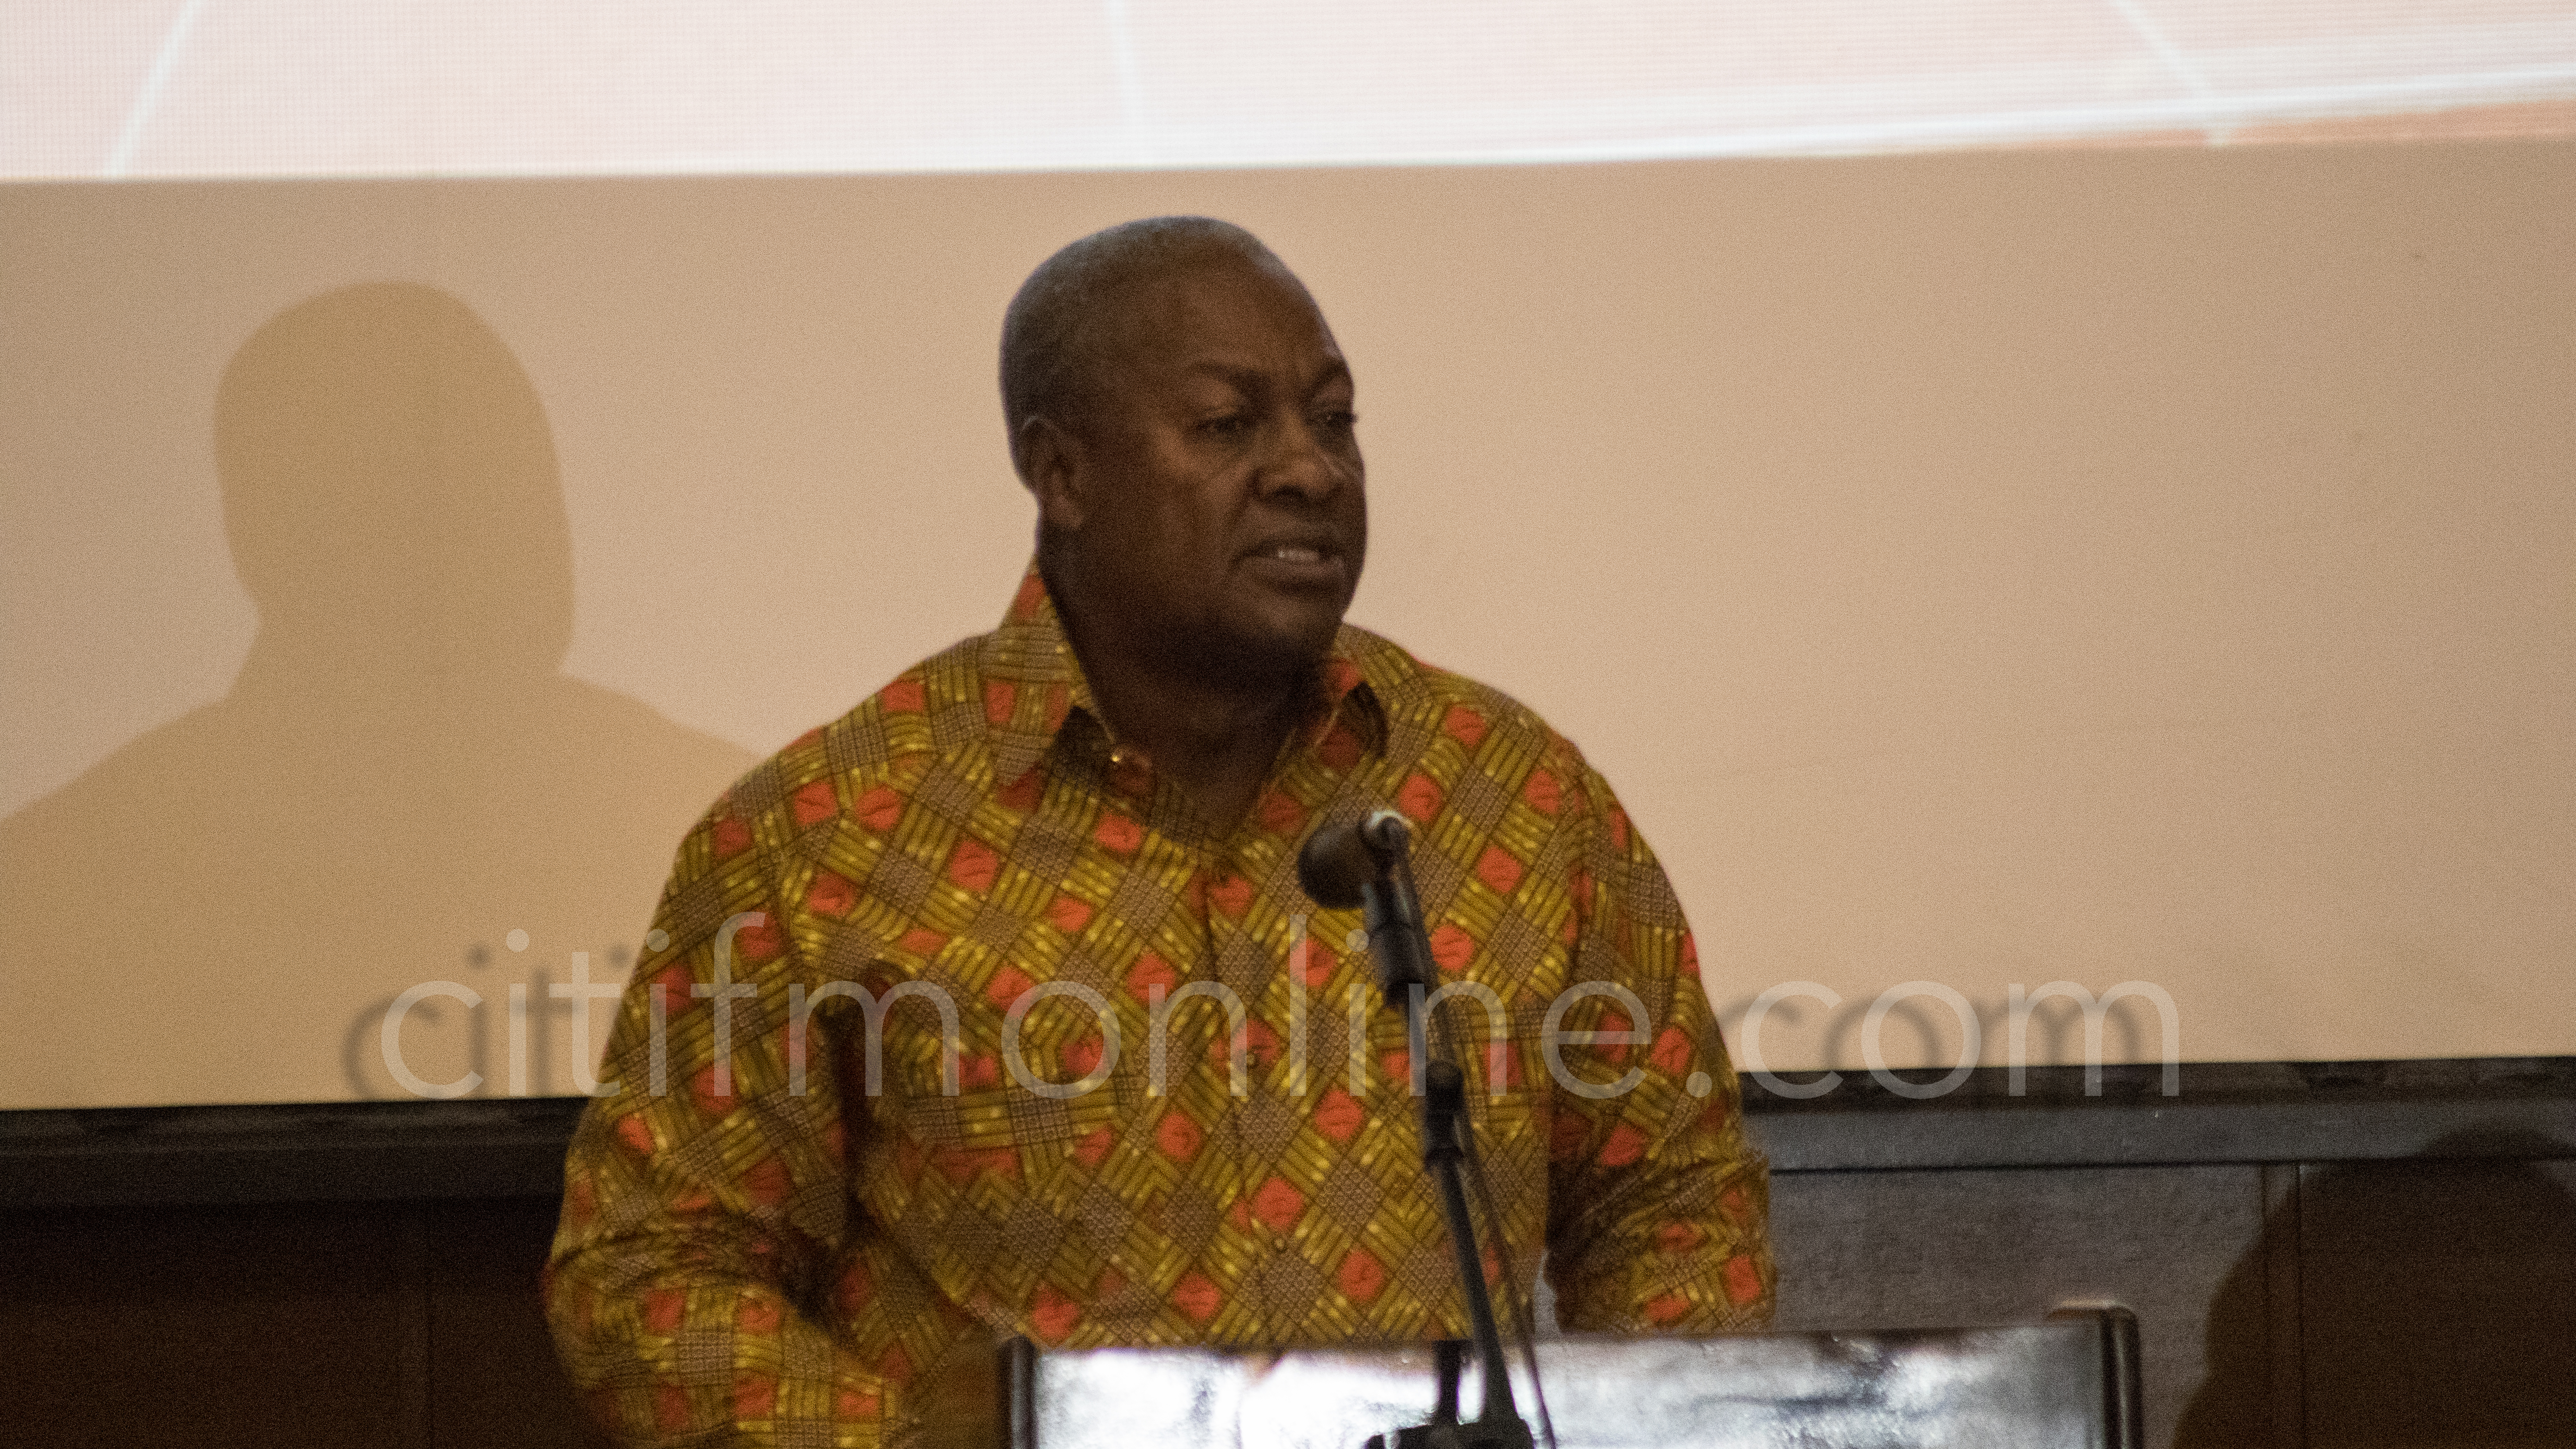 ‘We have every reason to be proud of our achievements’ – Mahama